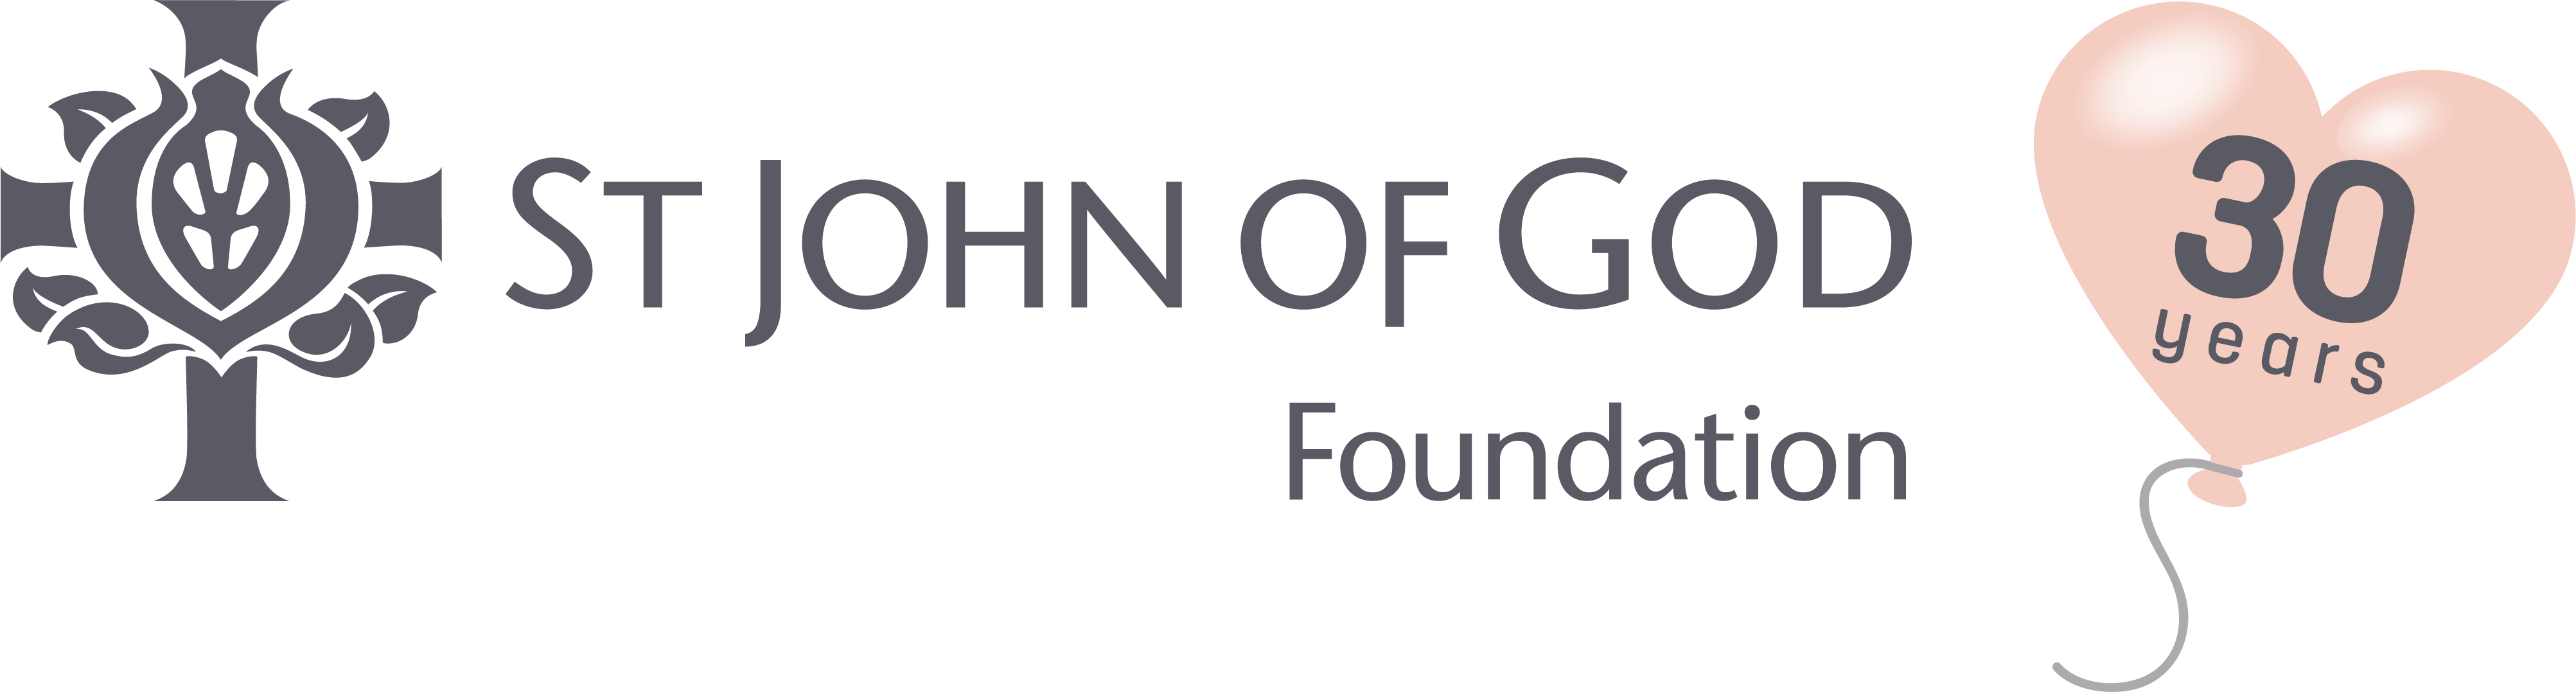 St John of God Foundation logo with illustration of a pink heart shaped balloon with the words 